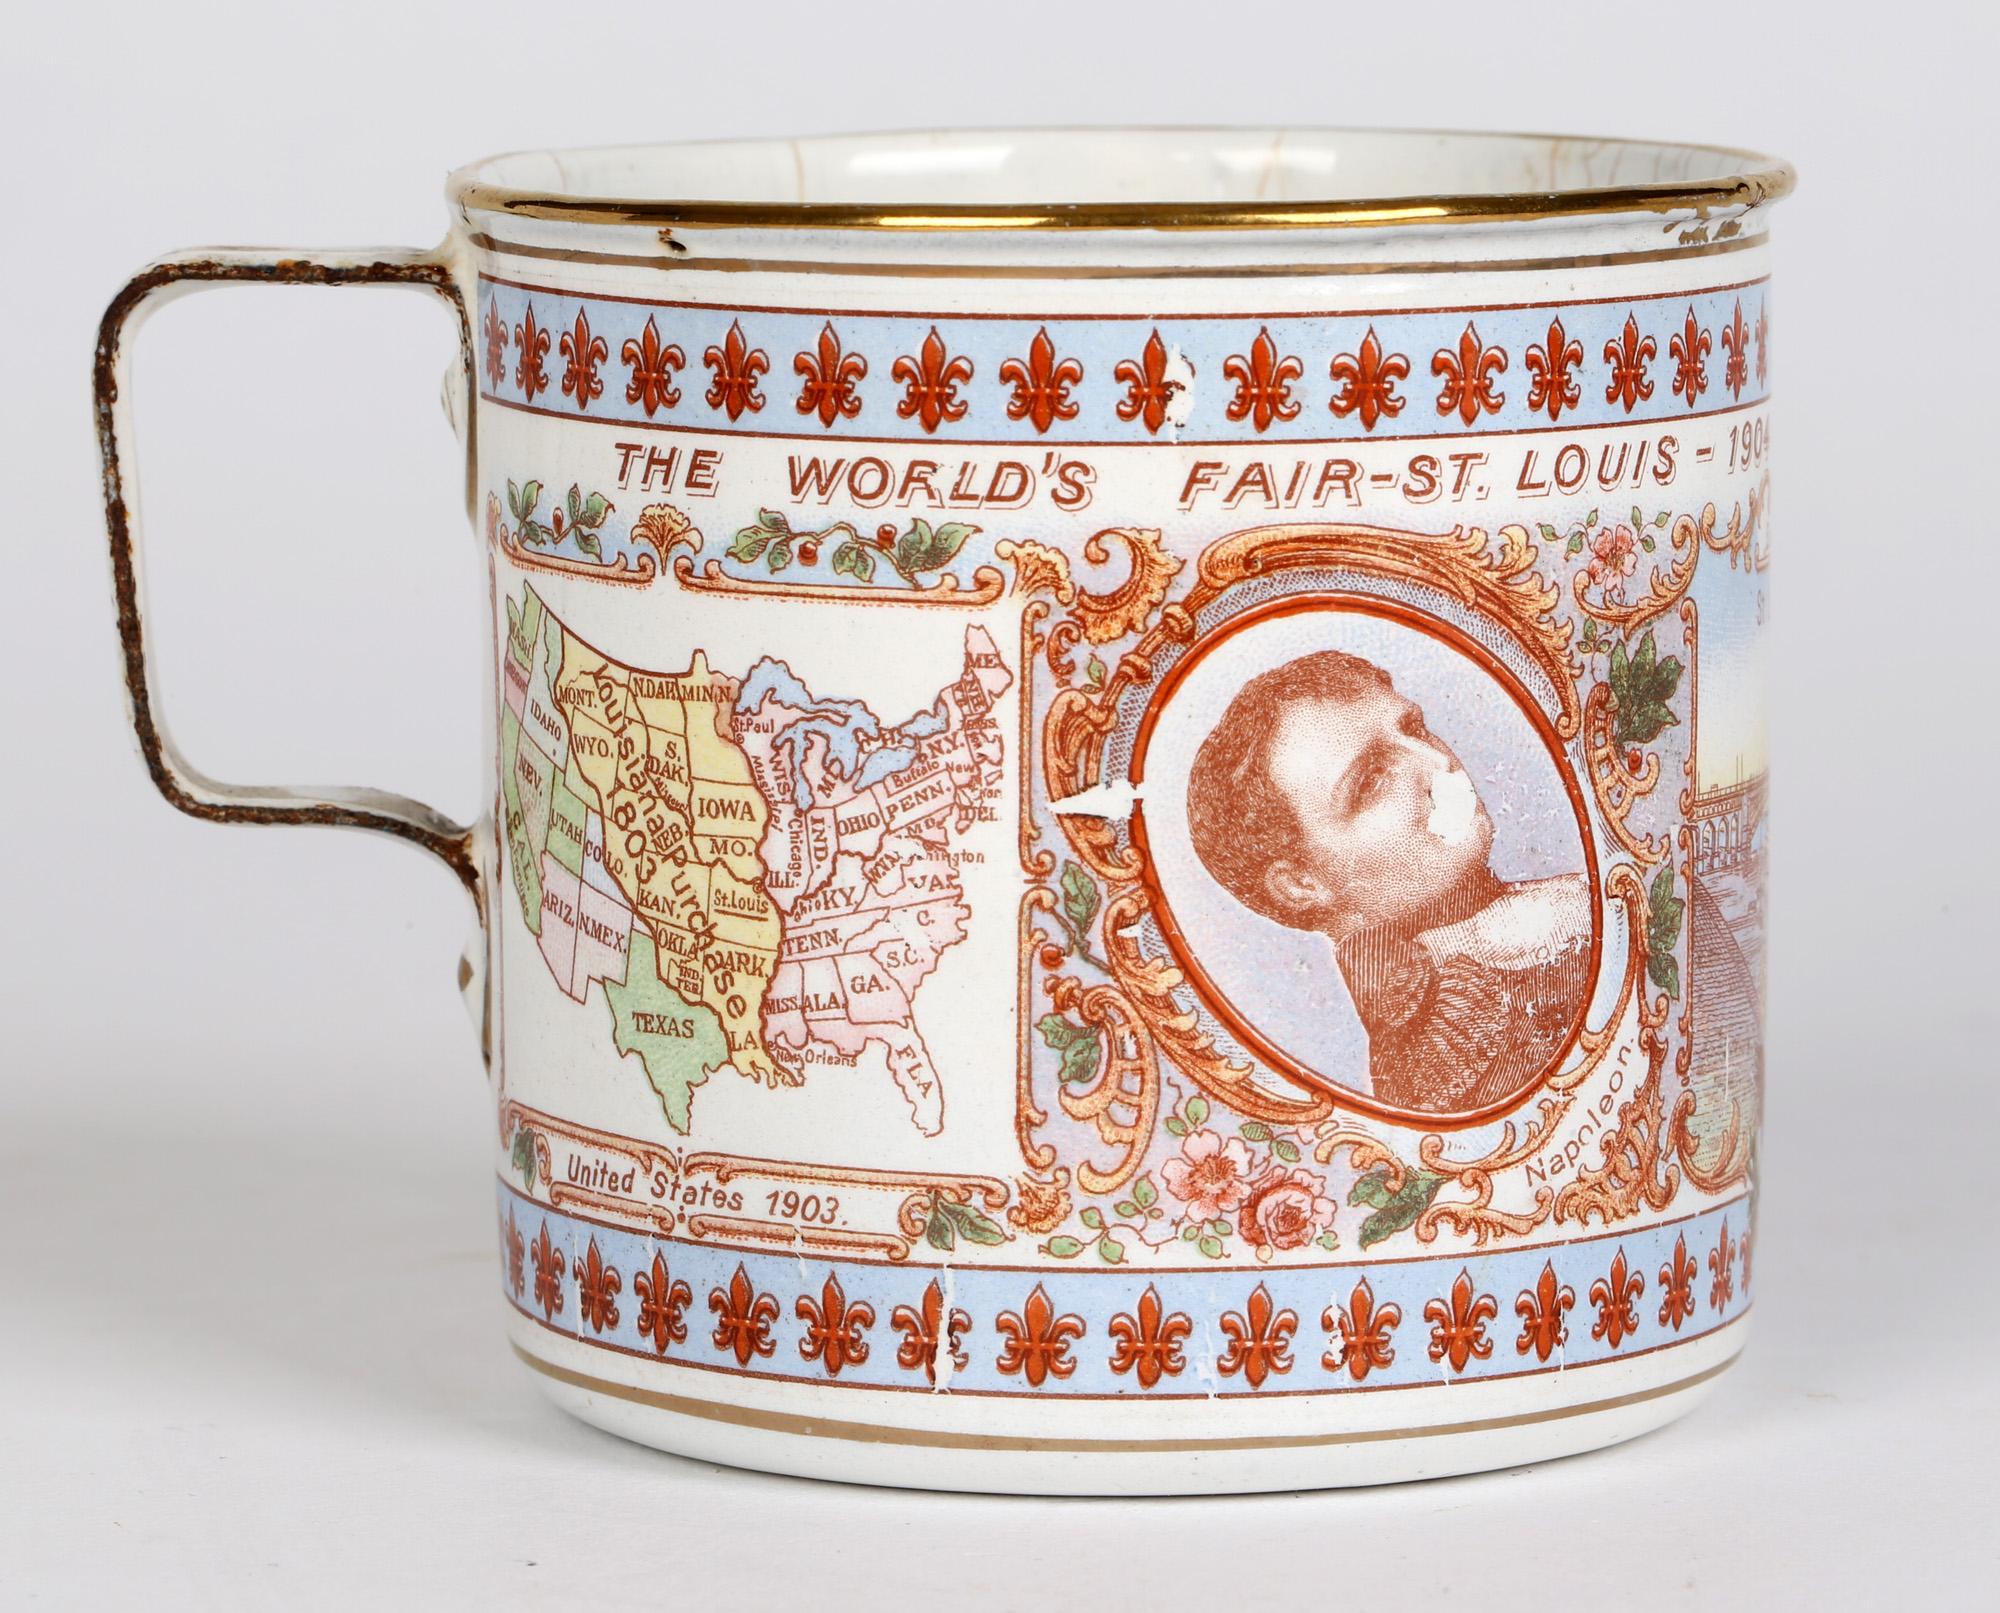 An interesting and unusual Austrian enamel mug commemorating The World's Fair in St Louis in 1904. The mug was made in Austria for Norvell-Shapleigh Hardware Co, St Louis and has portraits of Napoleon and Jefferson set either side of a scene titled